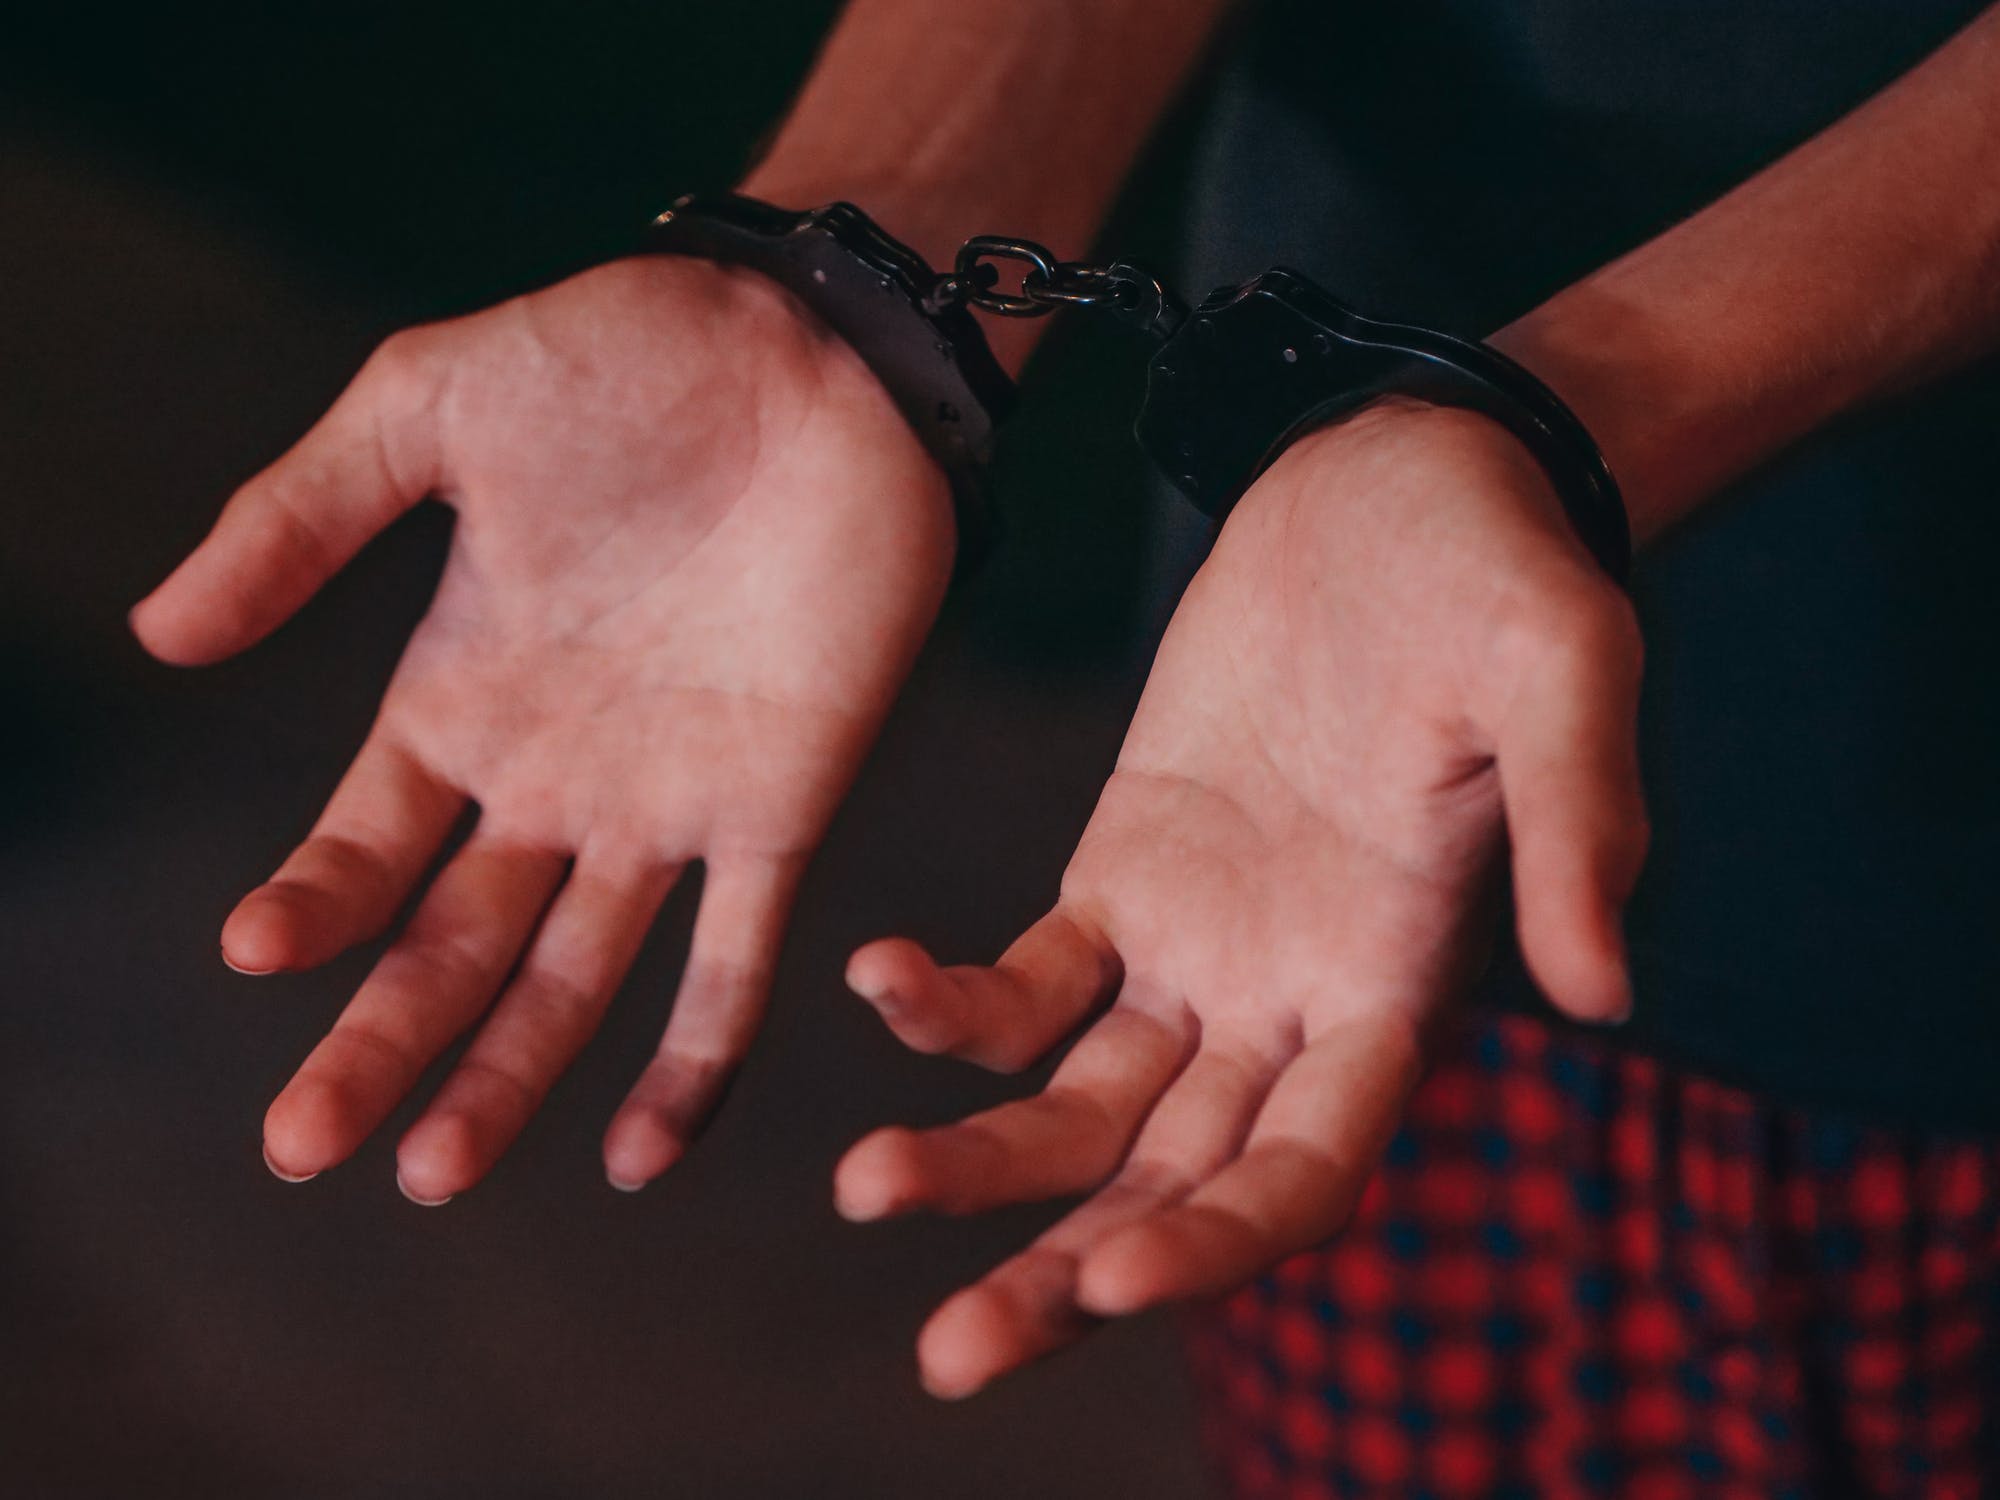 The police arrested me for kidnapping | Source: Unsplash